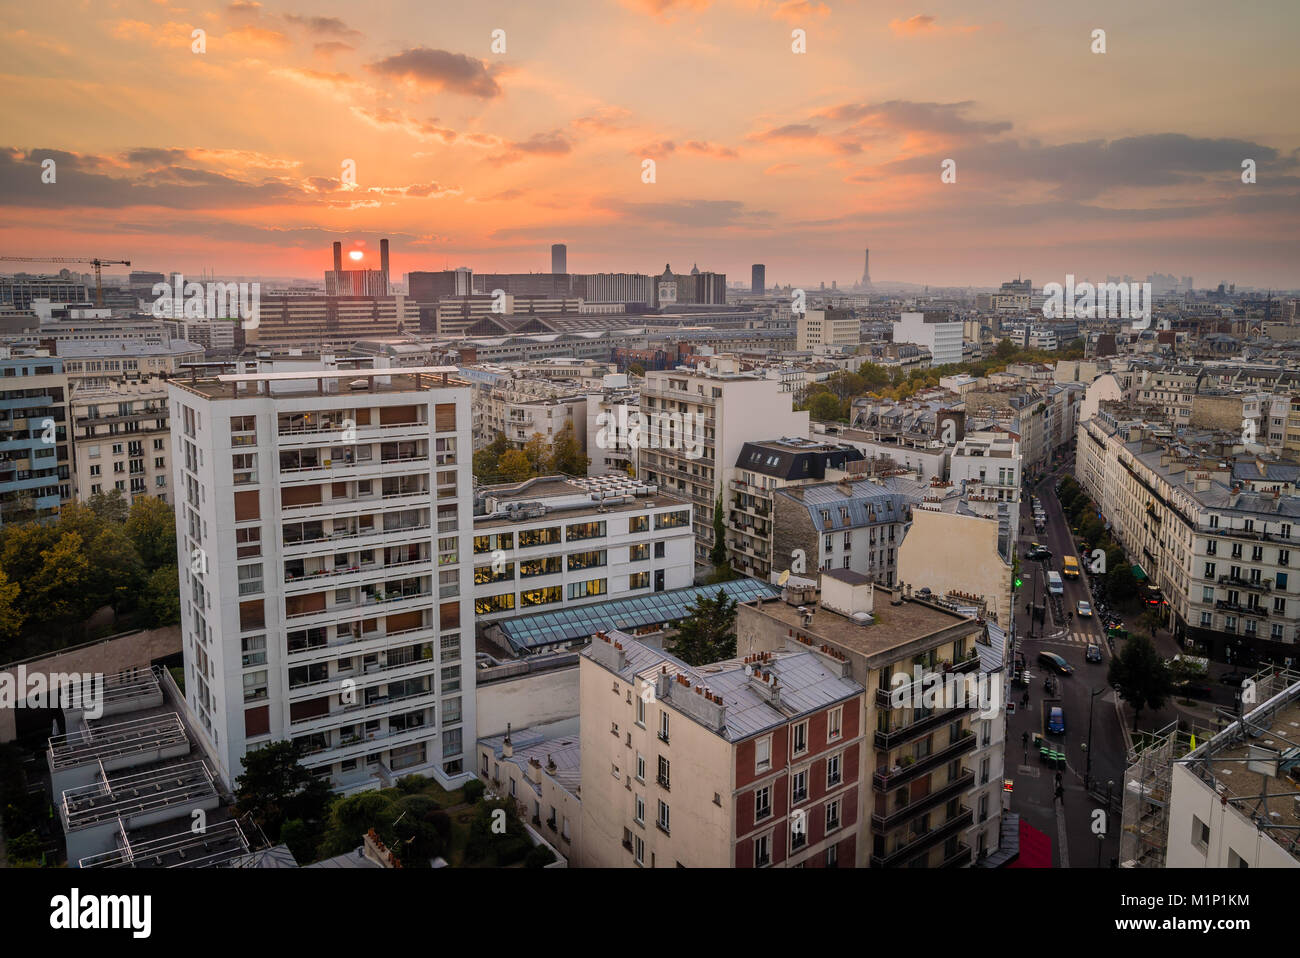 Paris HLM towers at sunset in the 12th arrondissement district Stock Photo